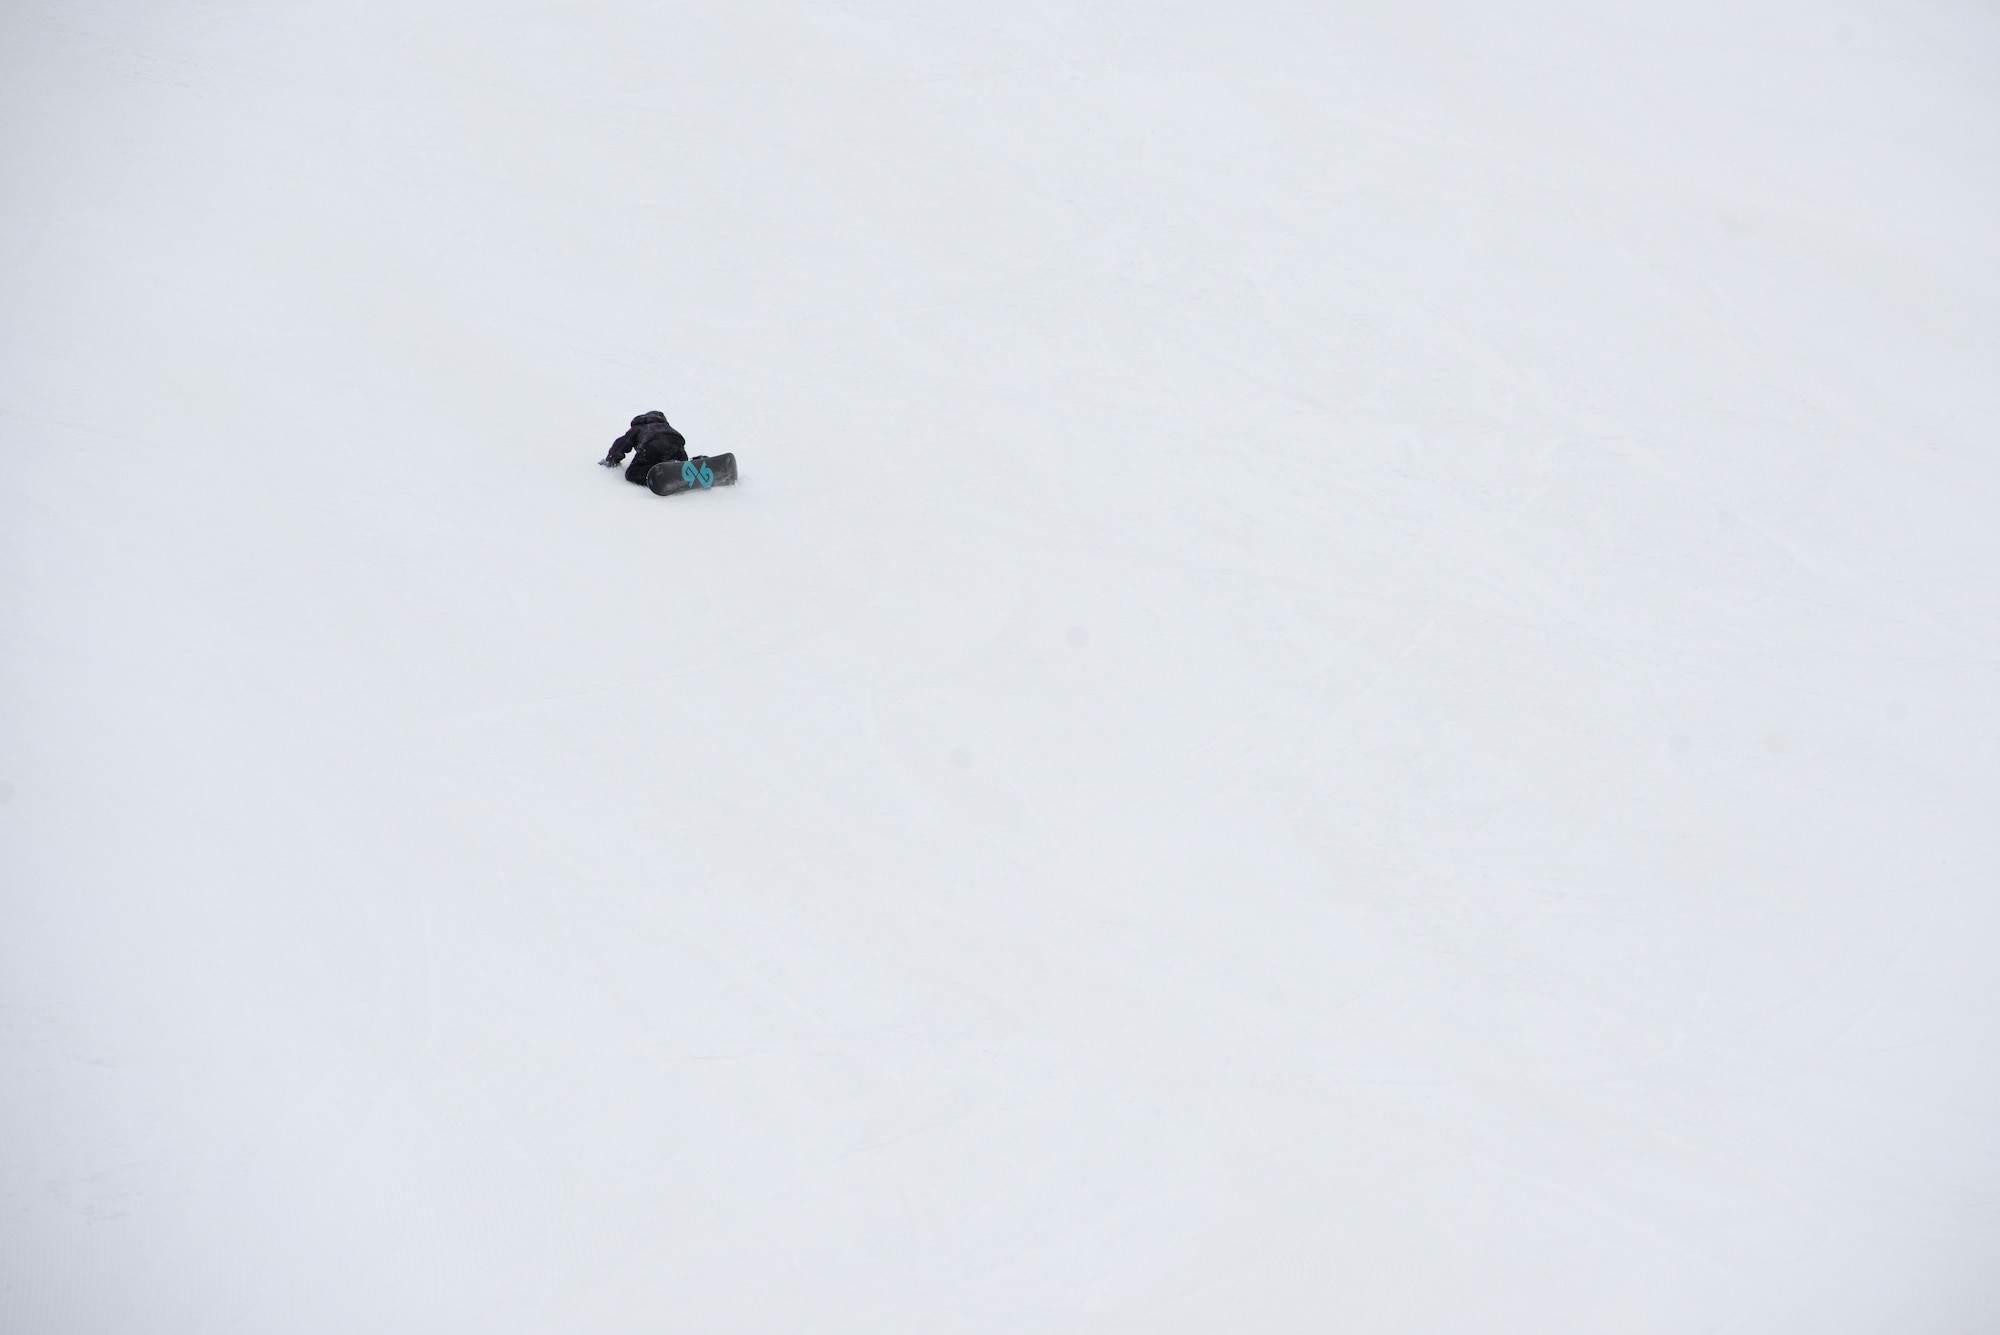 A snowboarder lies in the snow at the Hillberg Ski Area during Winterfest at Joint Base Elmendorf-Richardson, Alaska, Dec. 21, 2017. Winterfest was a winter solstice celebration hosted by Hillberg for anyone with base access and offered a plethora of events from noon to as late at 8 p.m.